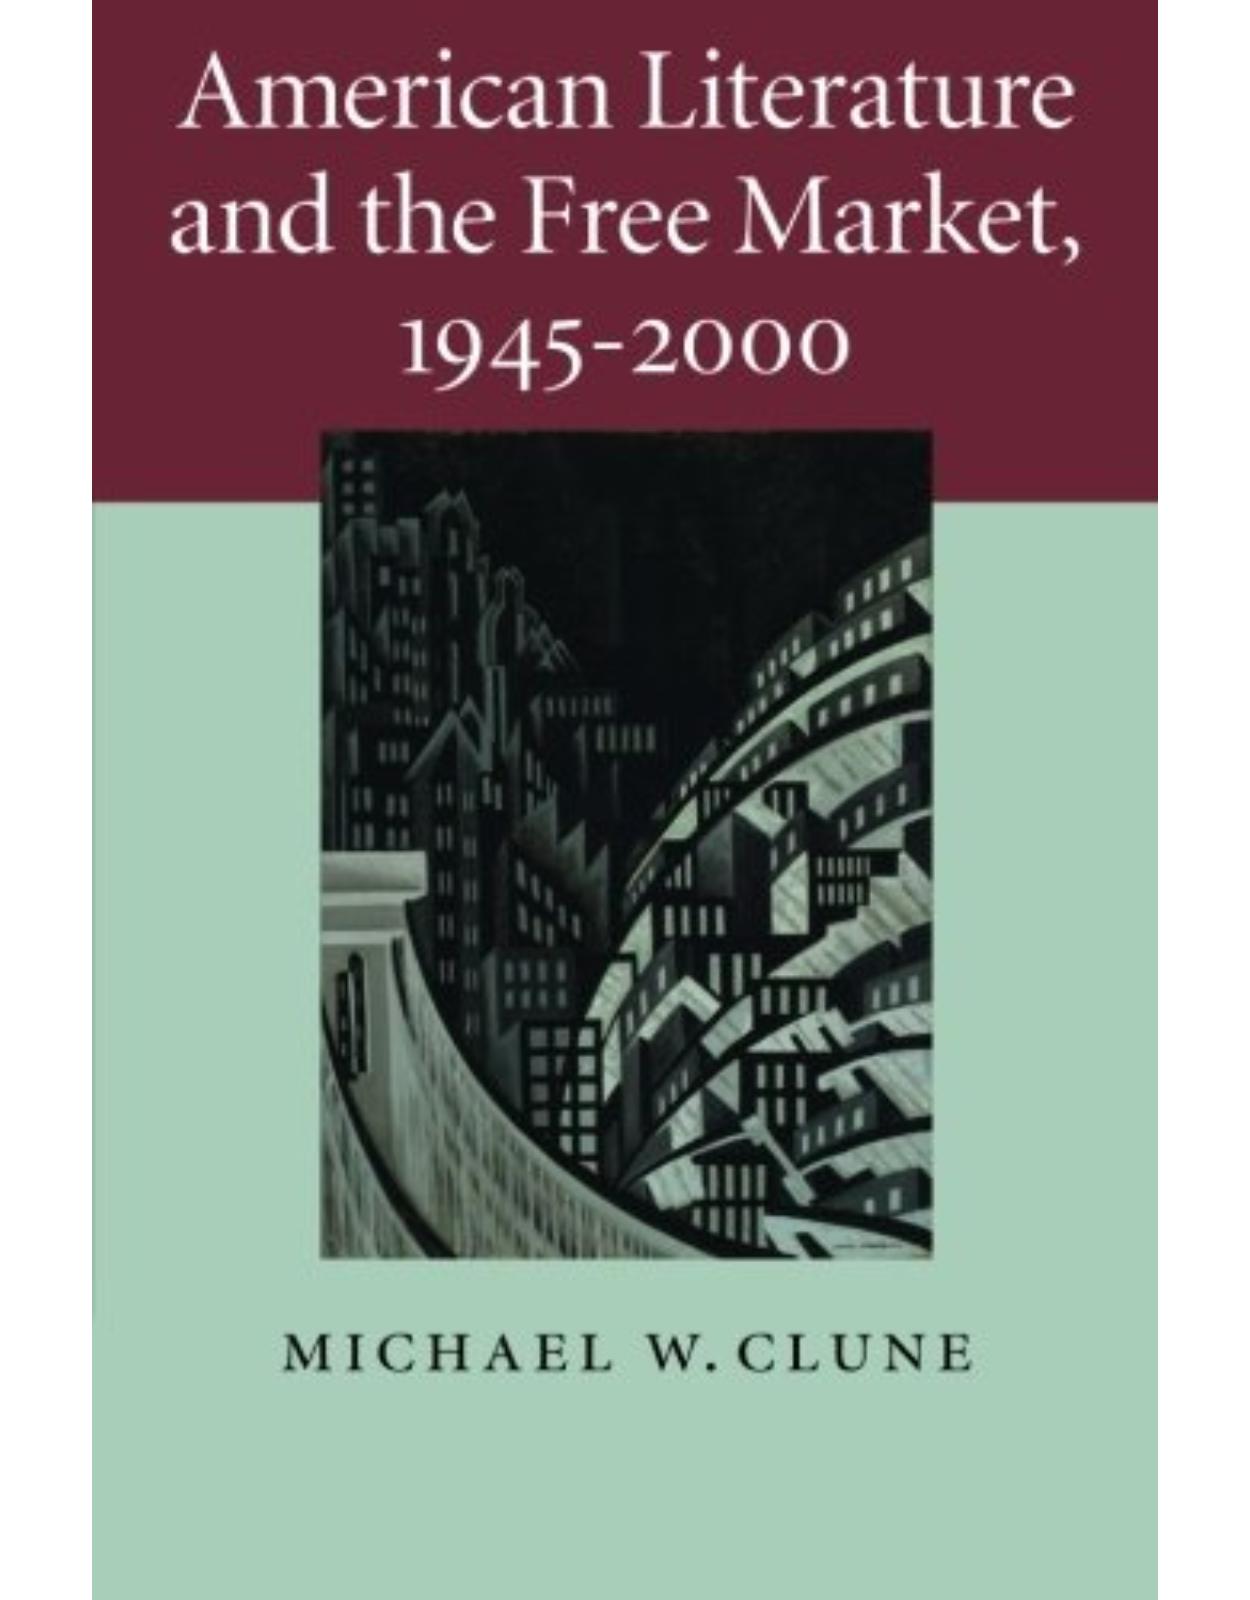 American Literature and the Free Market, 1945-2000 (Cambridge Studies in American Literature and Culture)